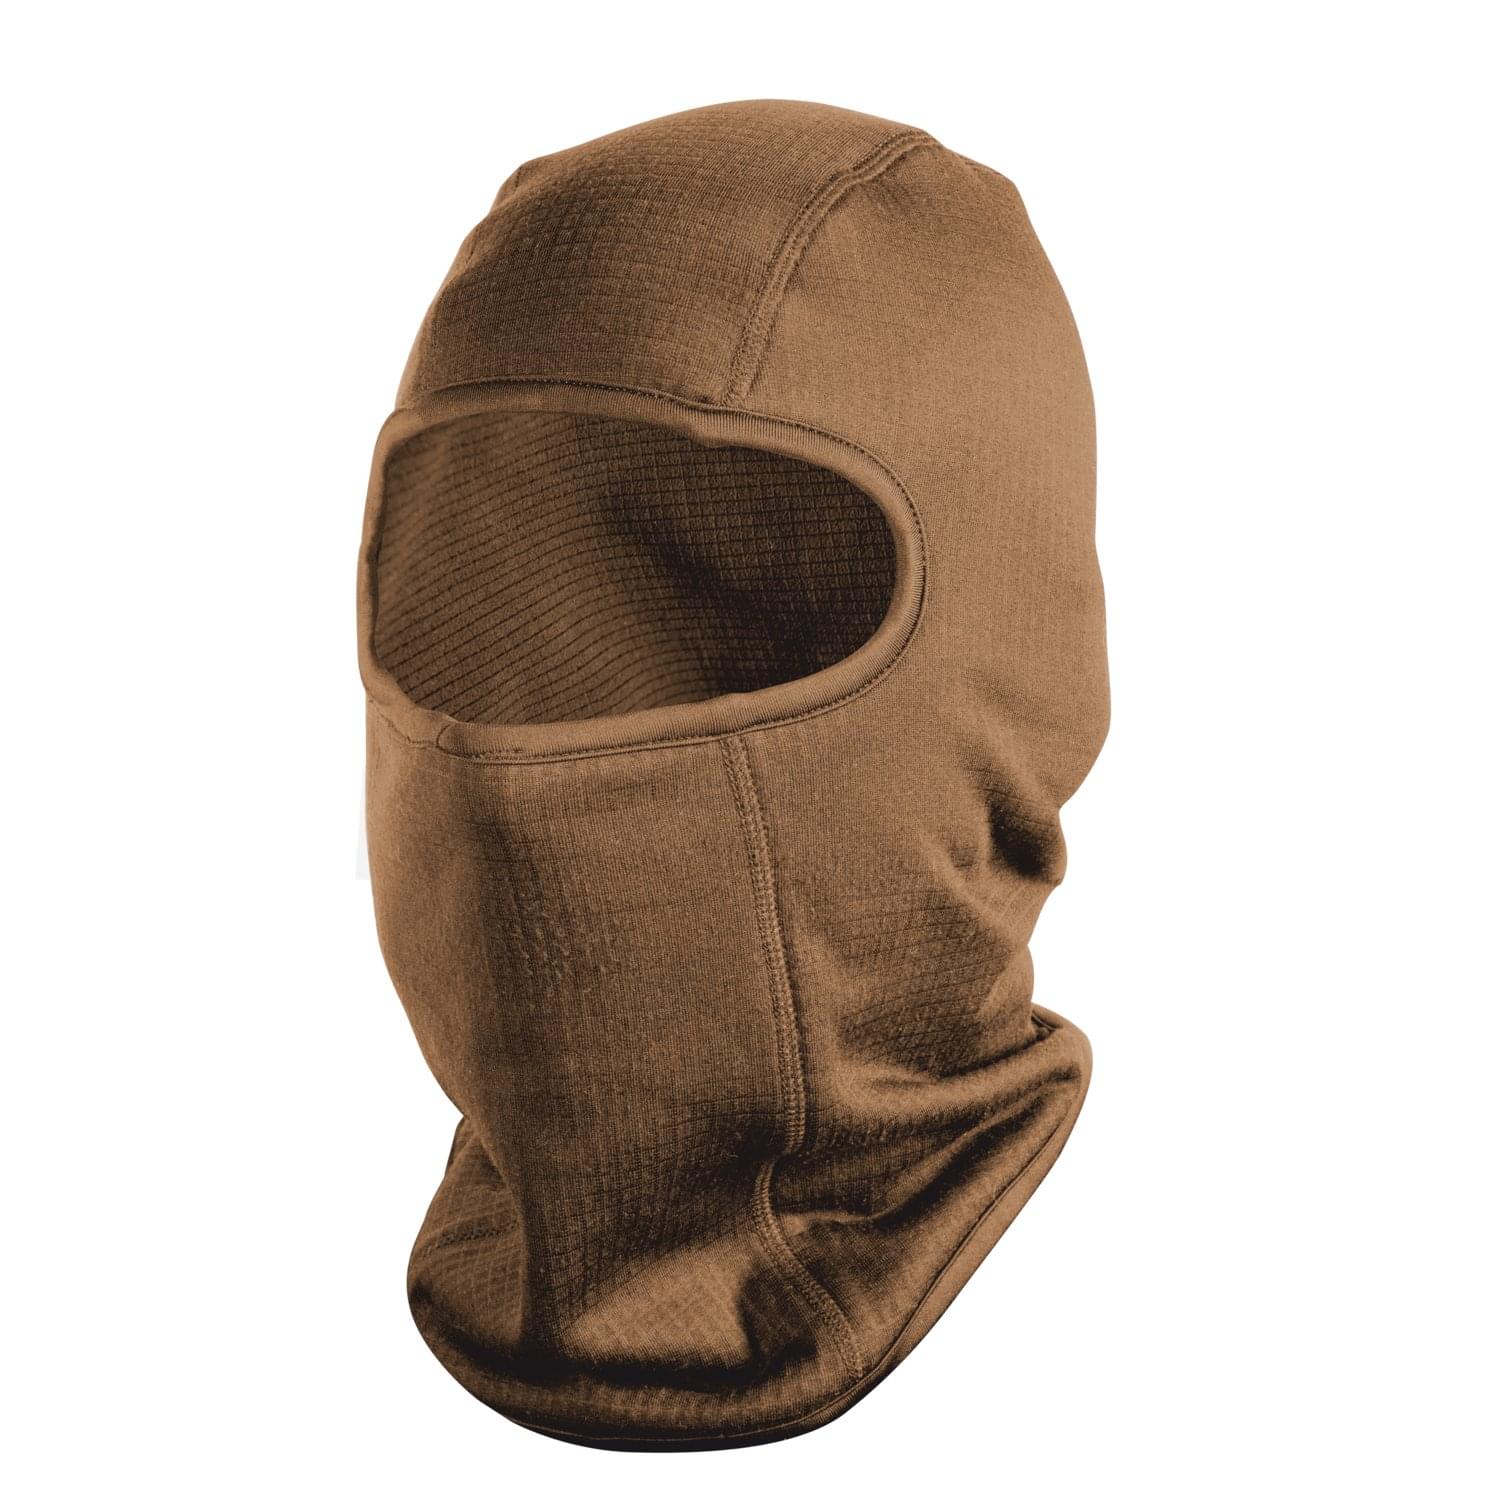 EXTREME COLD WEATHER BALACLAVA – COMFORTDRY® – Coyote